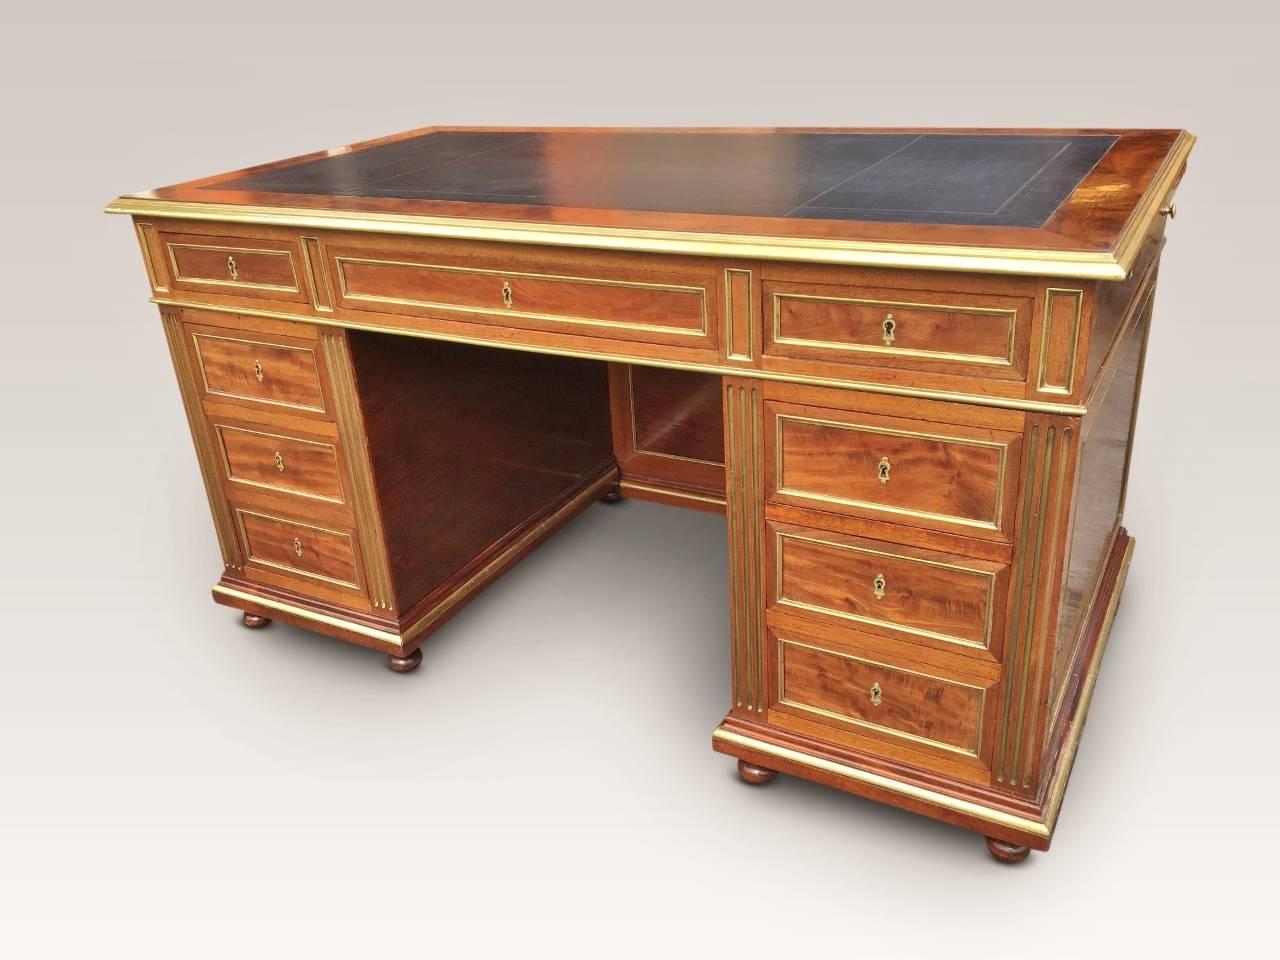 Fine quality mahogany pedestal writing desk, French, circa 1880.
This delightful writing desk stands on shallow bun feet, and is in figured mahogany with brass mouldings and beadings. The mahogany is well figured, with the entire desk retaining a